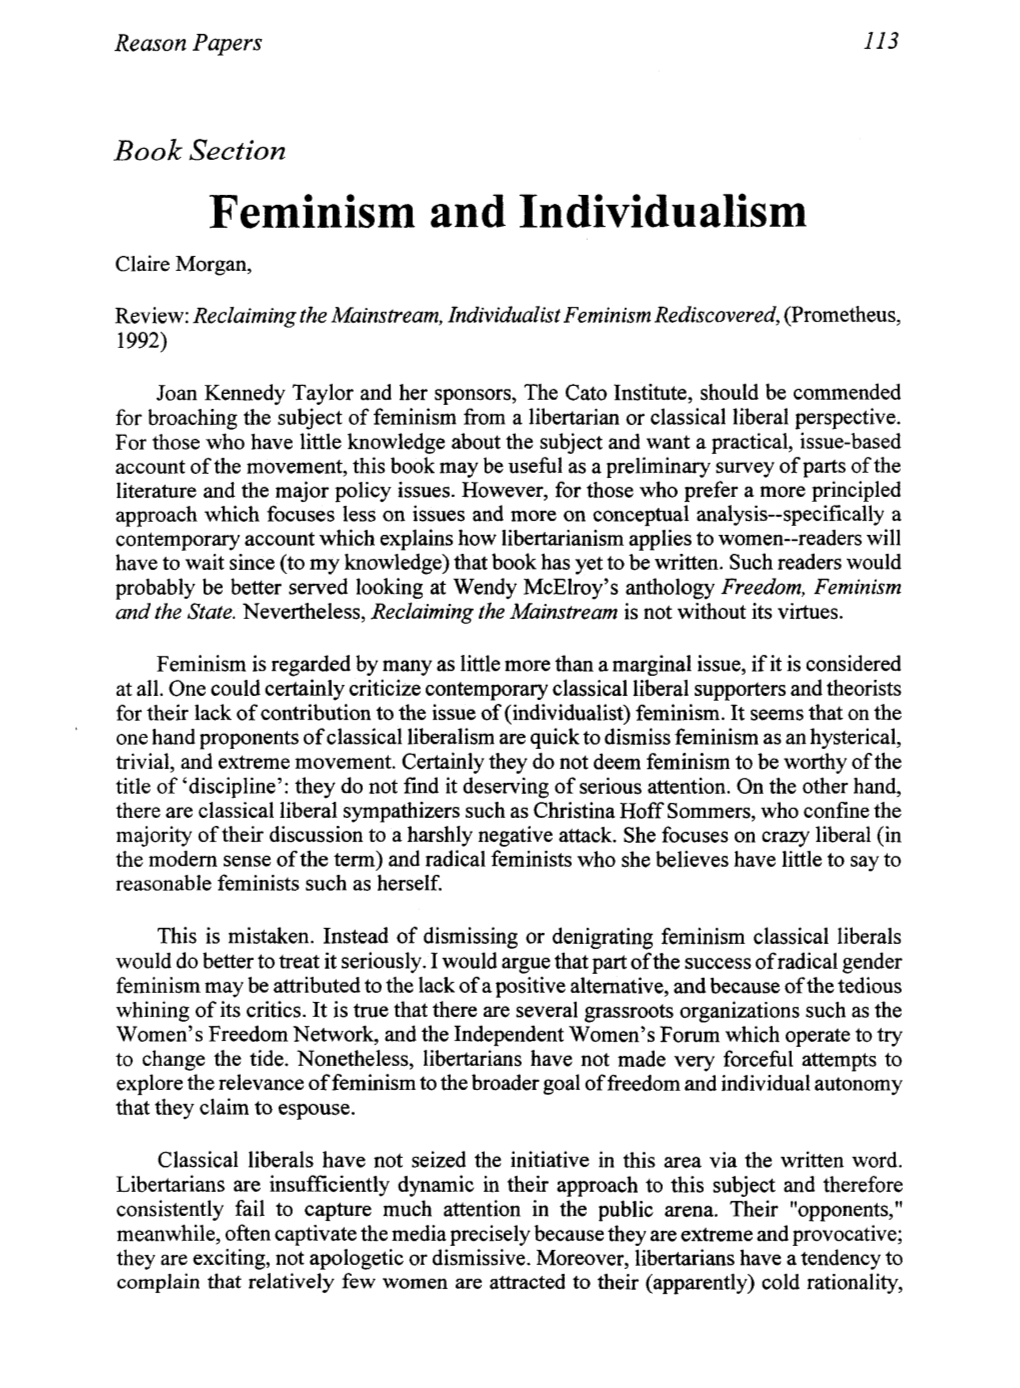 Feminism and Individualism Claire Morgan